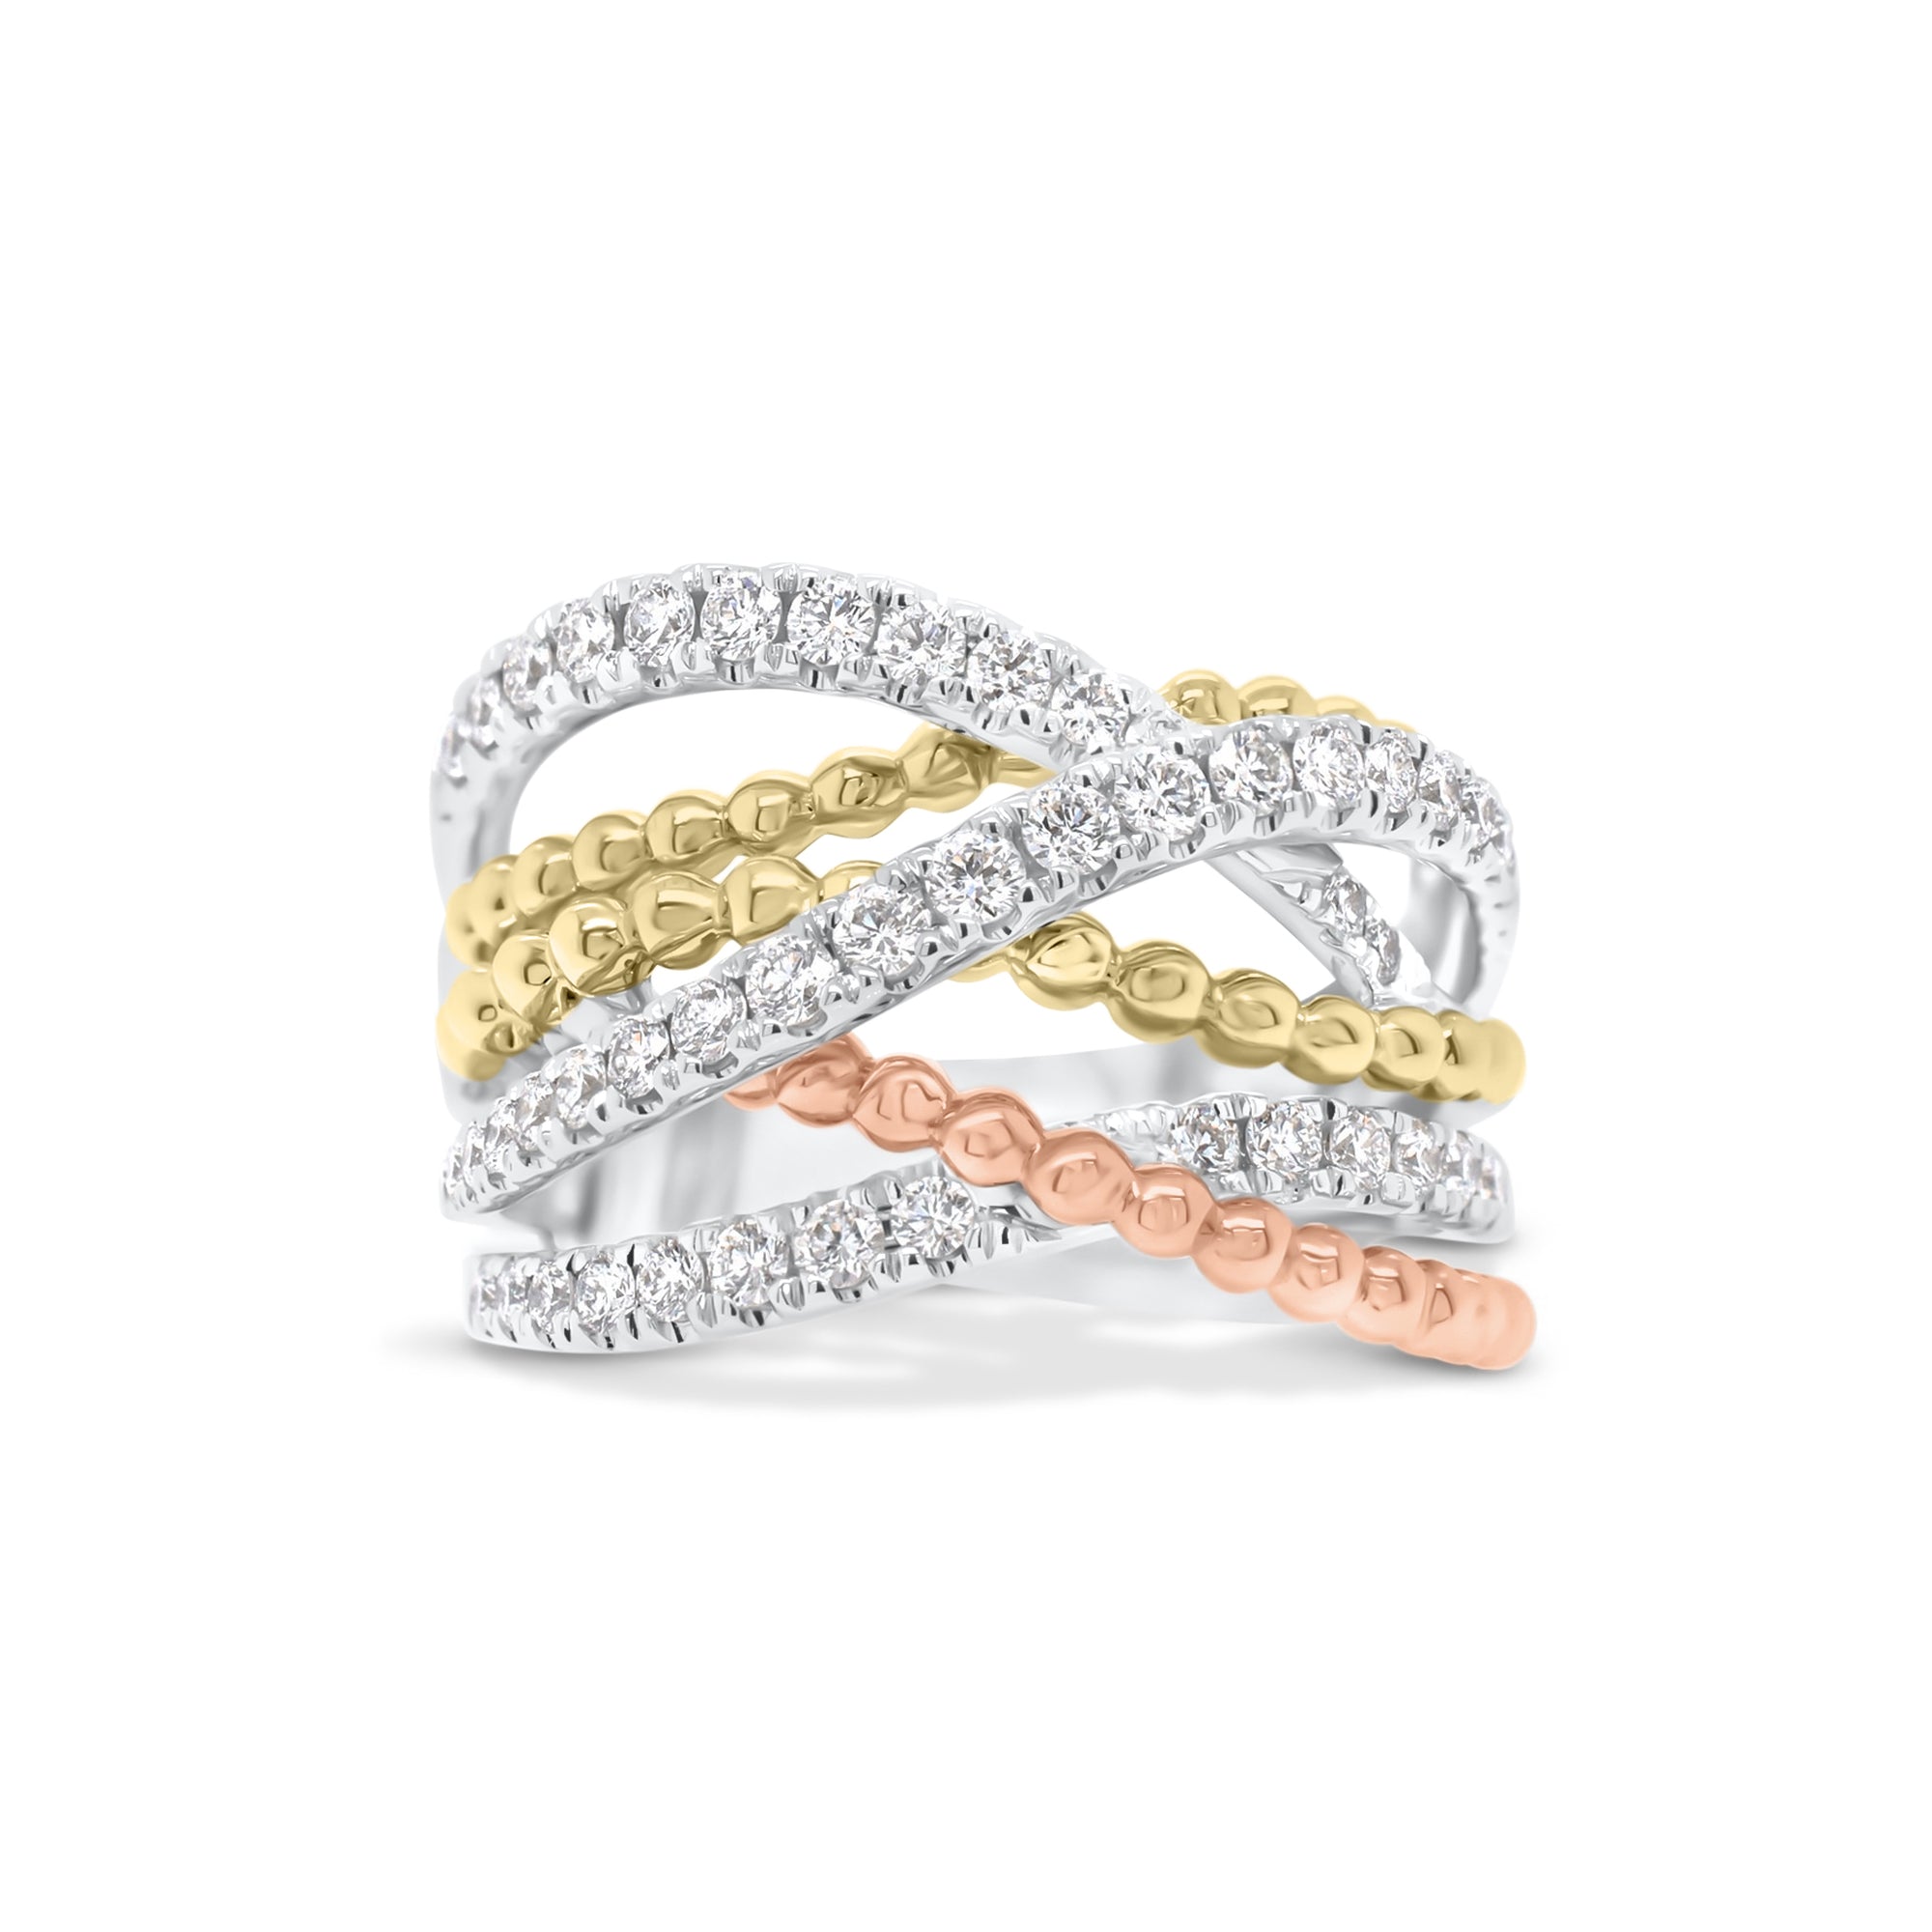 Diamond & Beaded Gold Interwoven Bands Ring  - 14K gold weighing 8.03 grams  - 51 round diamonds totaling 0.74 carats